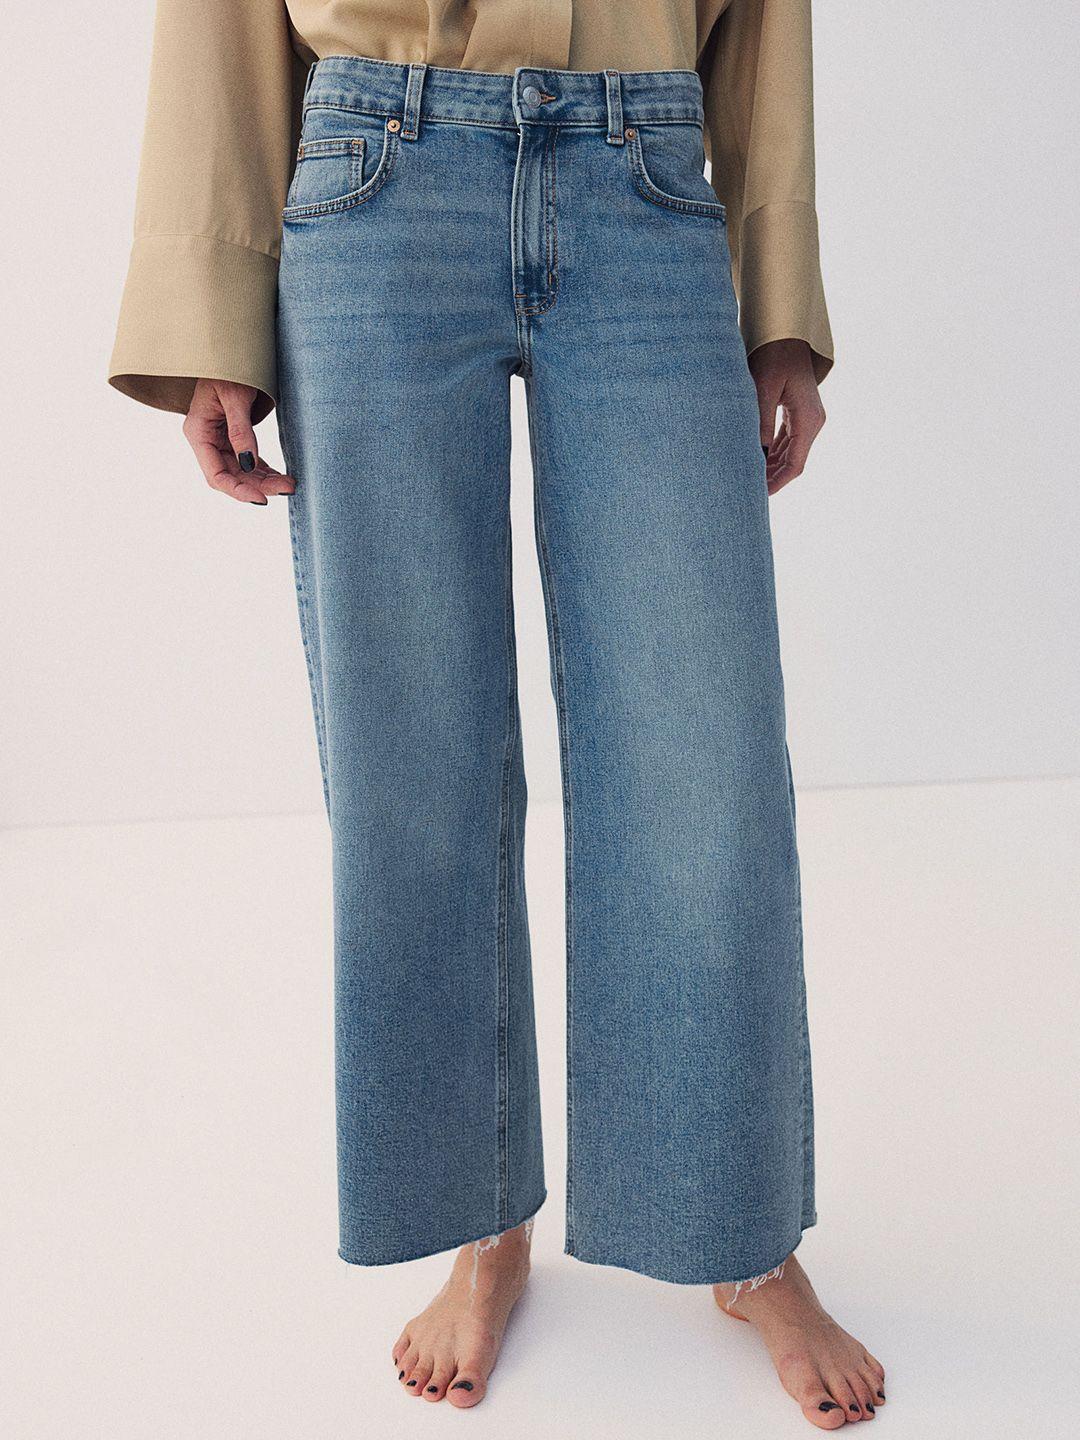 h&m-women-wide-high-ankle-jeans